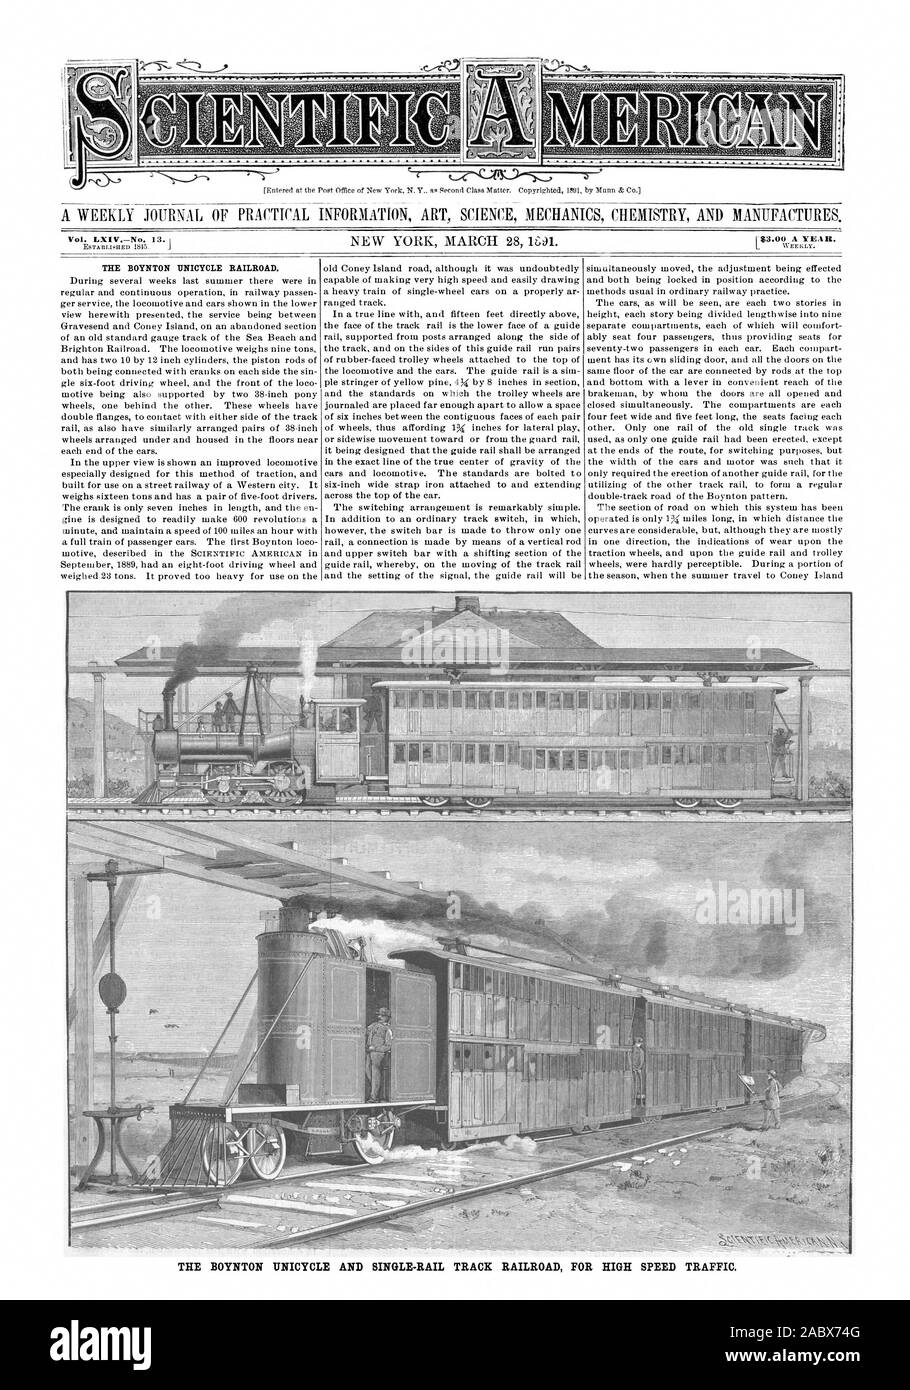 A WEEKLY JOURNAL OF PRACTICAL INFORMATION ART SCIENCE MECHANICS CHEMISTRY AND MANUFACTURES. THE BOYNTON UNICYCLE RAILROAD., scientific american, 1891-03-28 Stock Photo